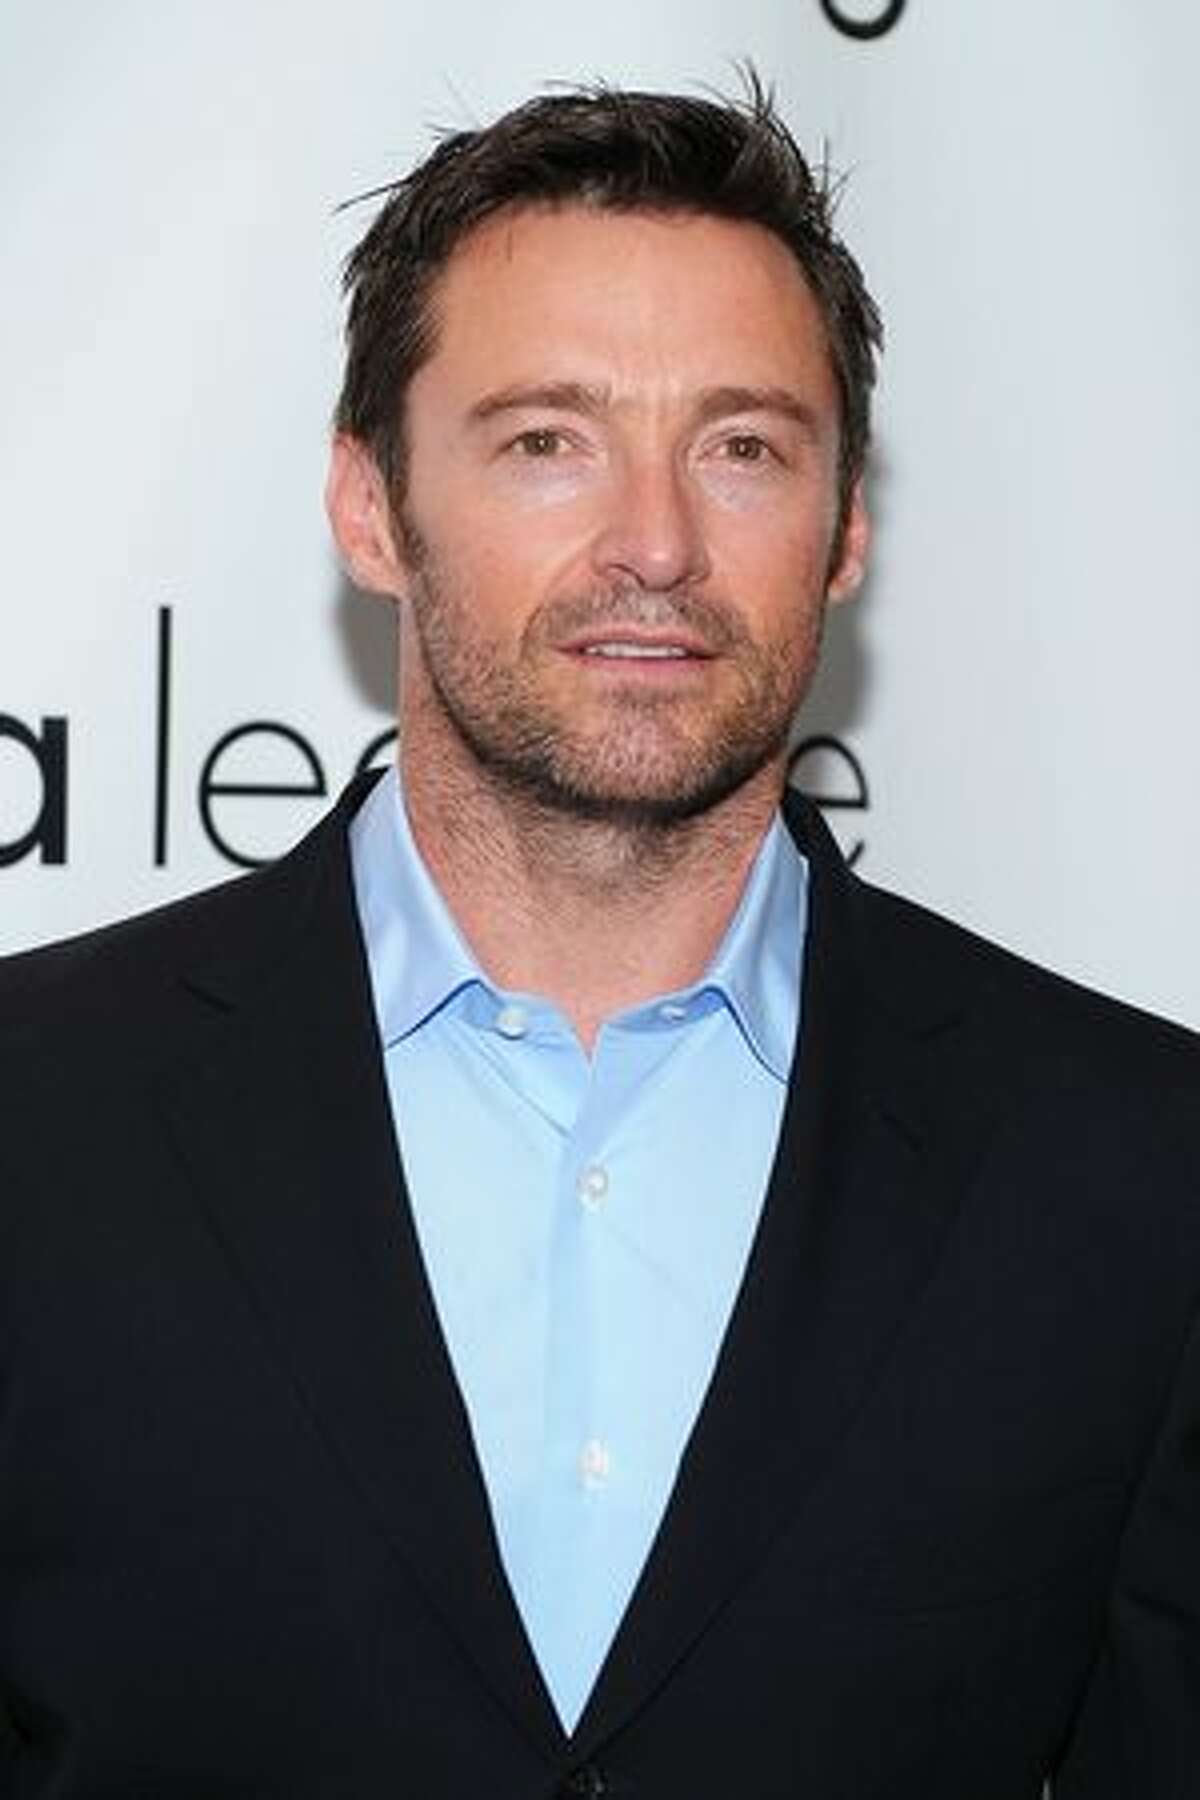 Actor Hugh Jackman attends the 76th Annual Drama League Awards ceremony and luncheon at the Marriot Marquis on May 21, 2010 in New York City.